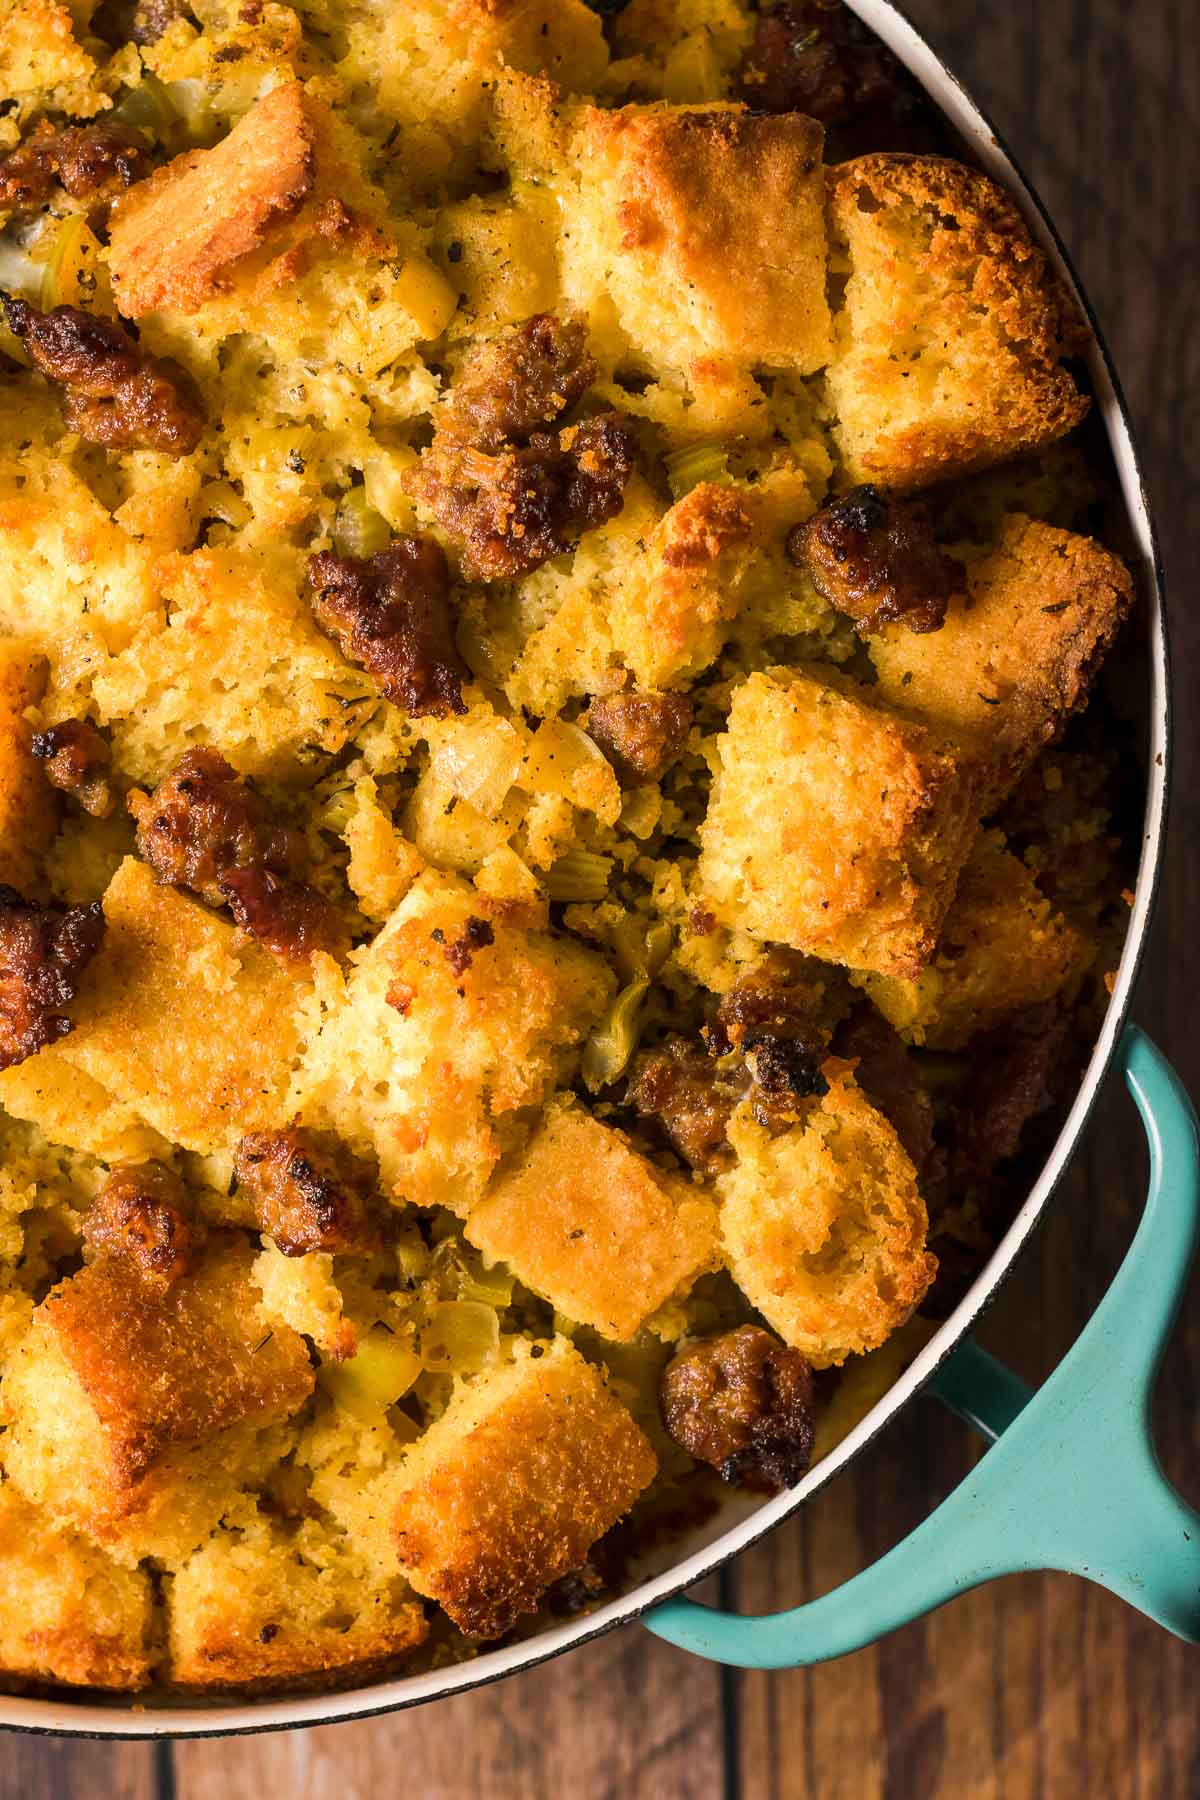 Toasty brown cornbread cubes and sausage shown in a round casserole dish.